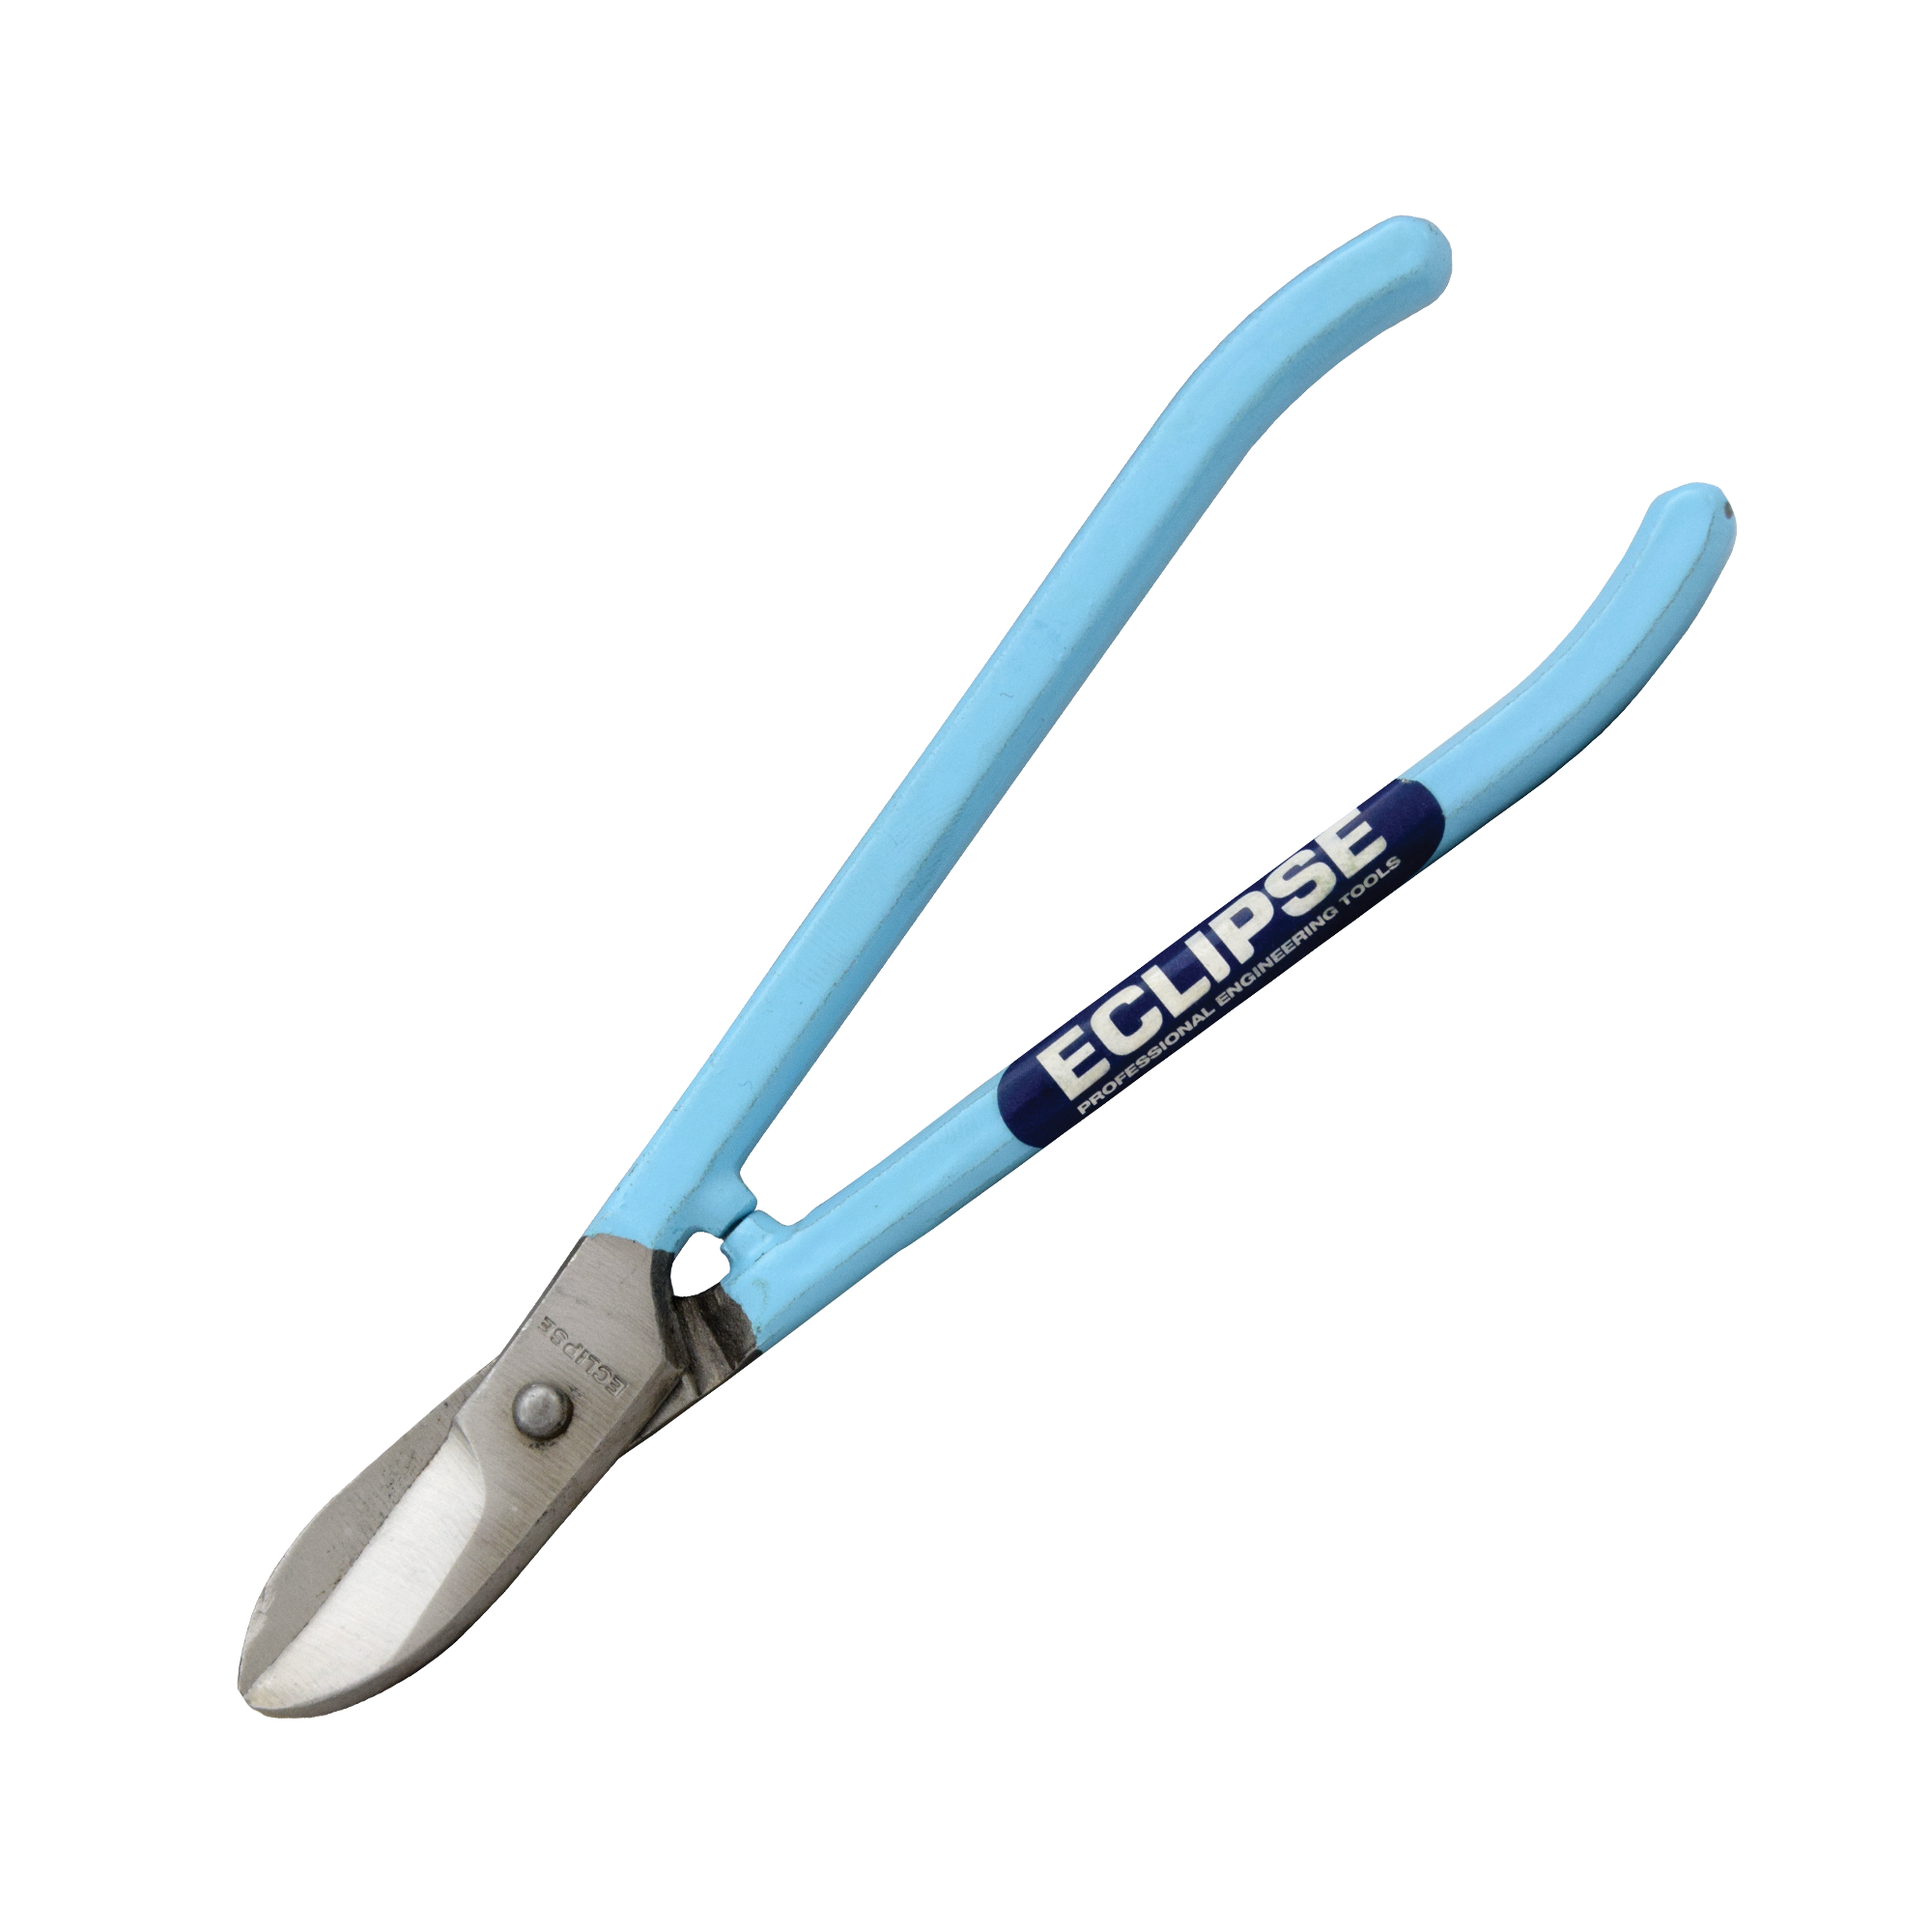 Snips Professional Straight Blade 7" - EC-ESJ7S by Eclipse